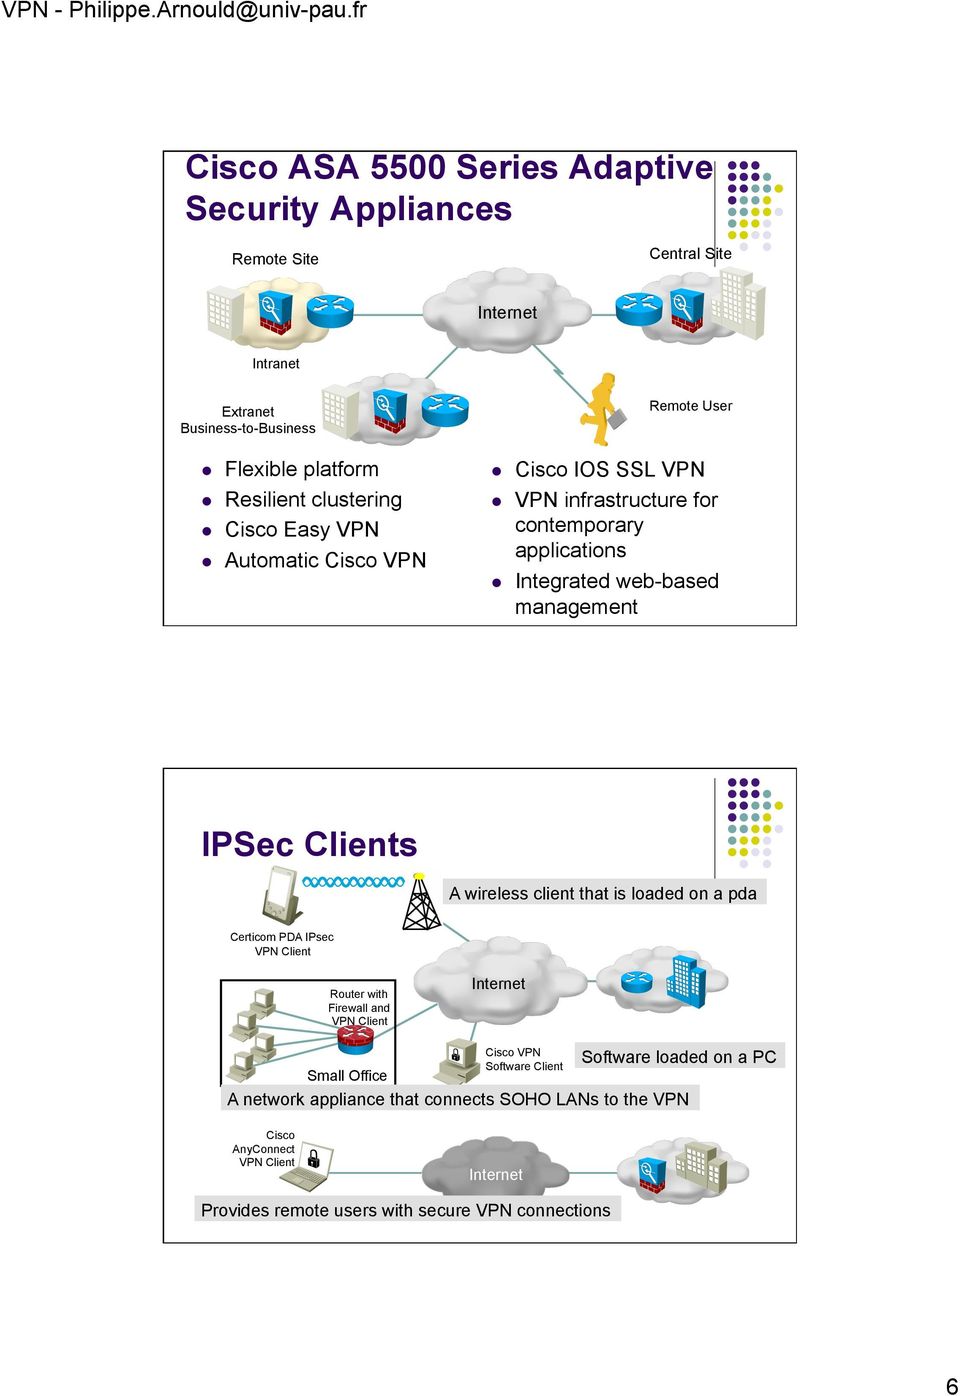 IPSec Clients A wireless client that is loaded on a pda Certicom PDA IPsec VPN Client Router with Firewall and VPN Client Internet Cisco VPN Software loaded on a